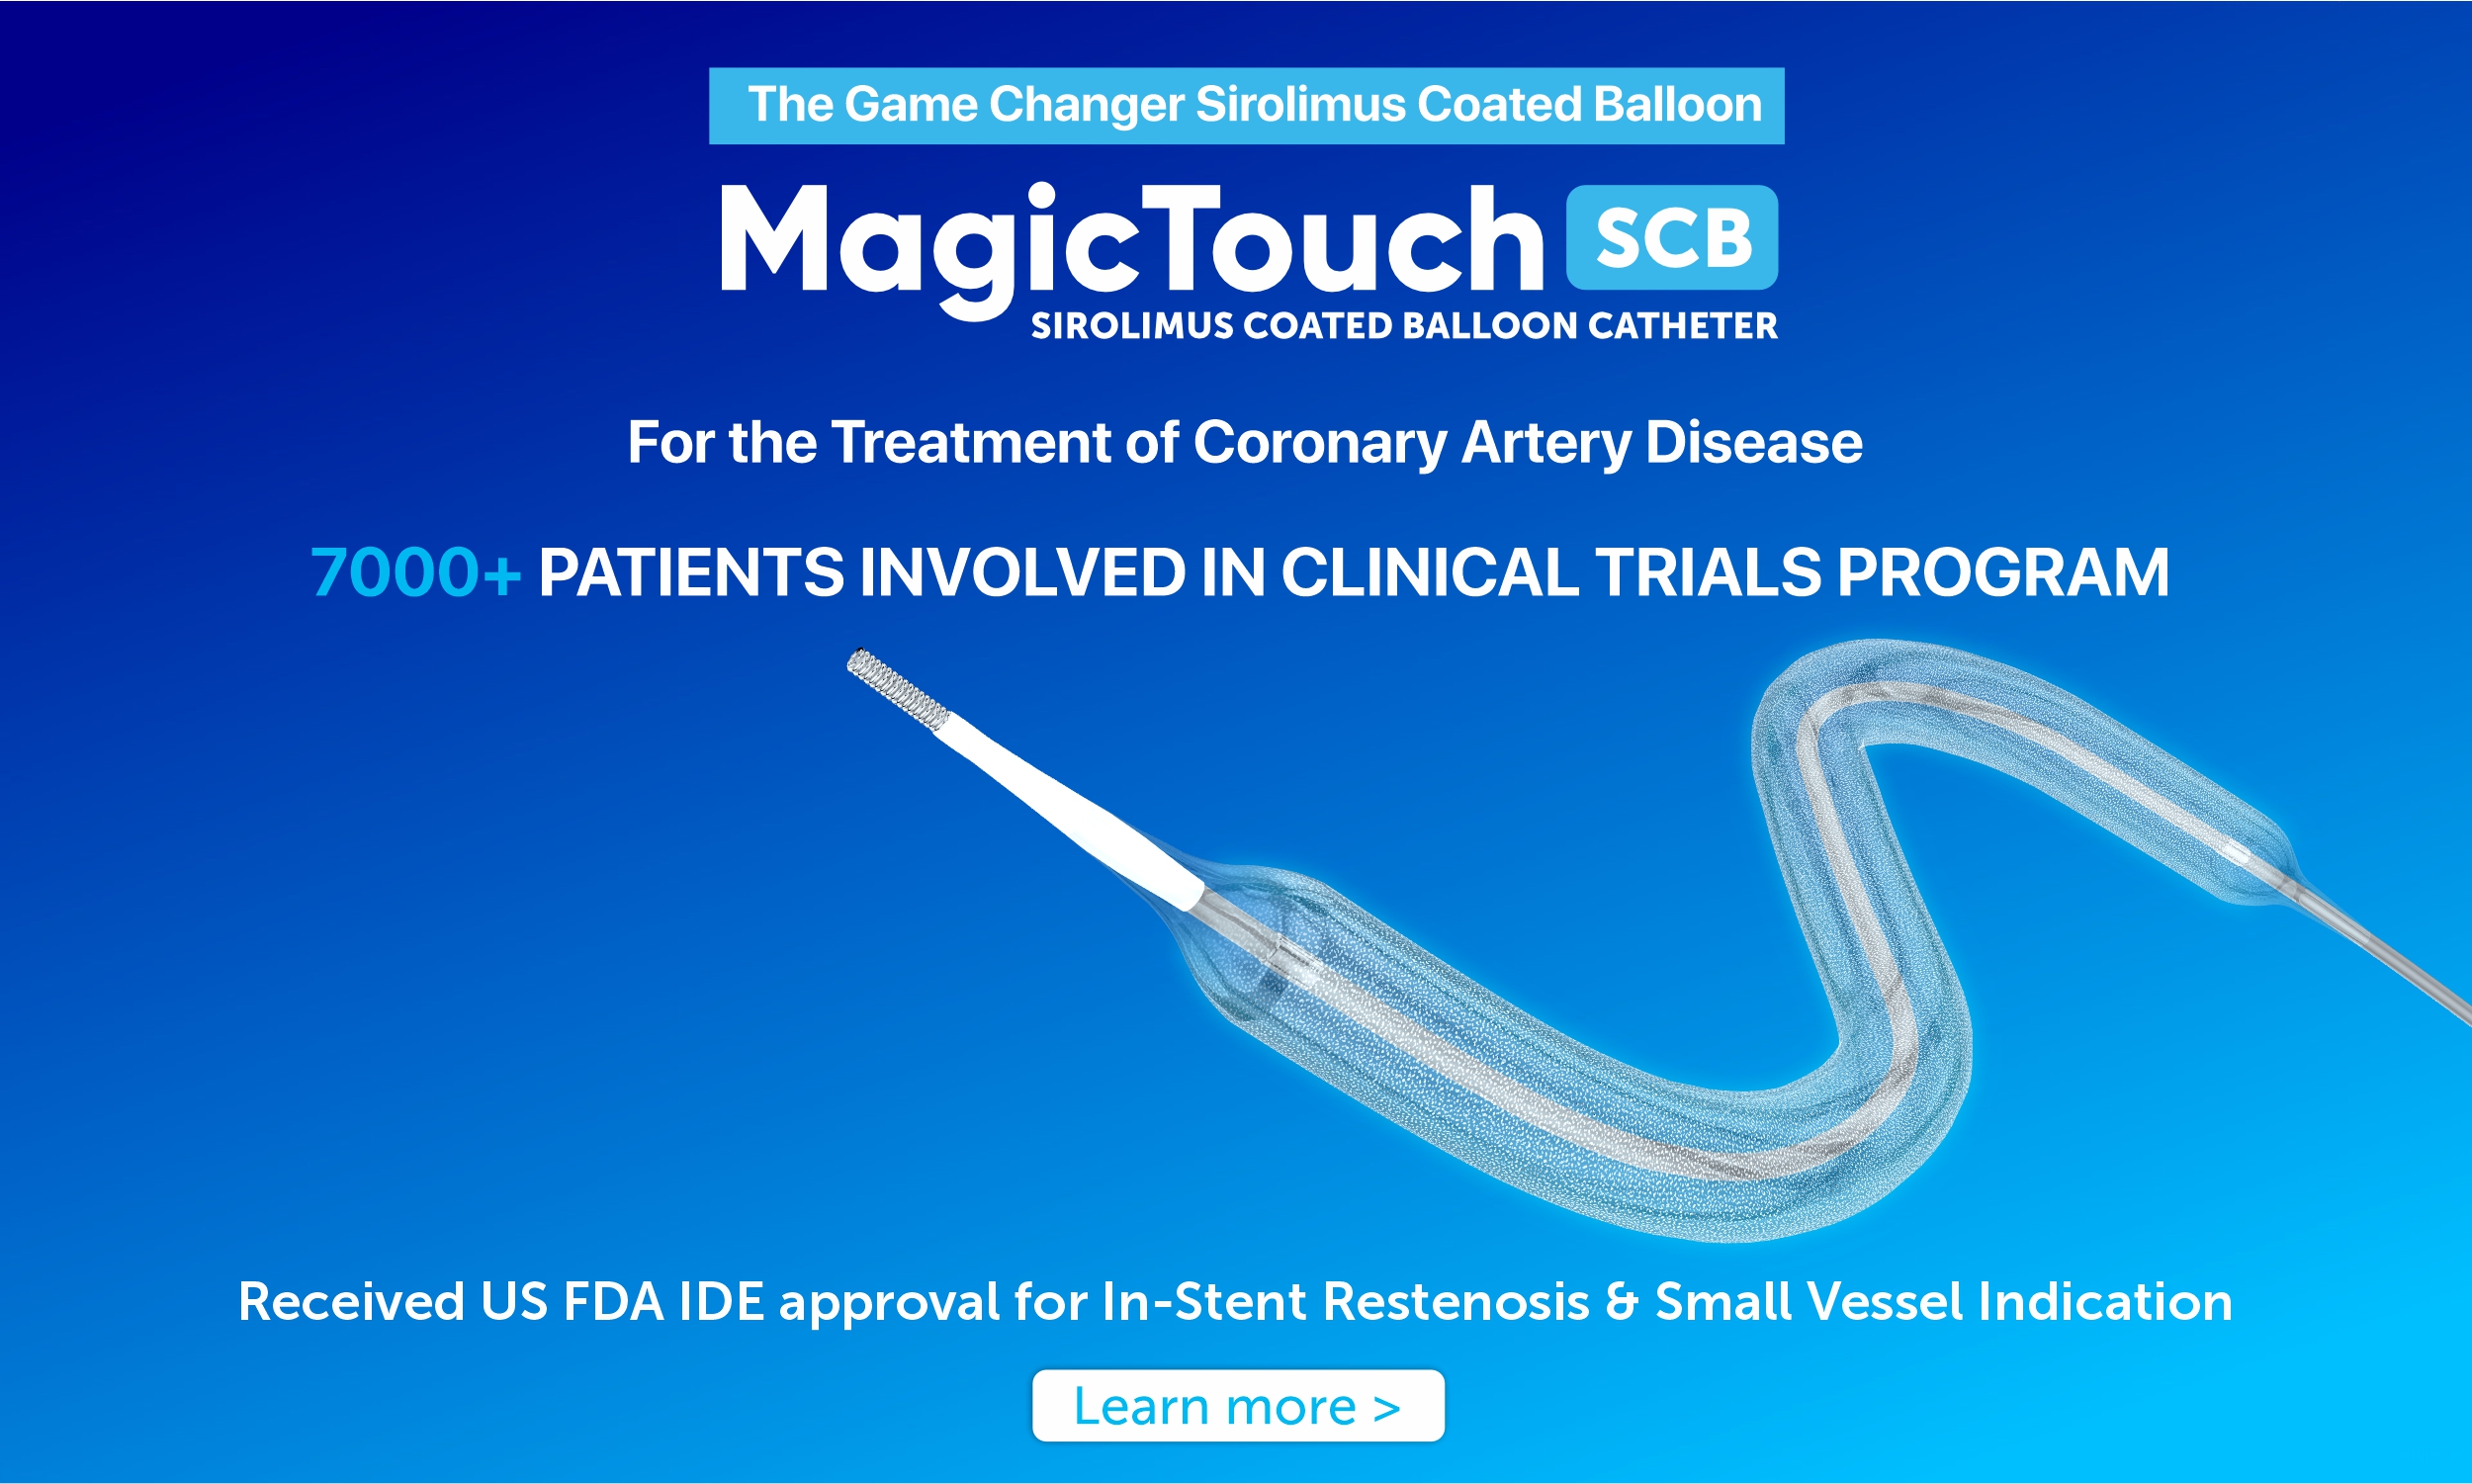 MagicTouch SCB - EuroPCR 2023